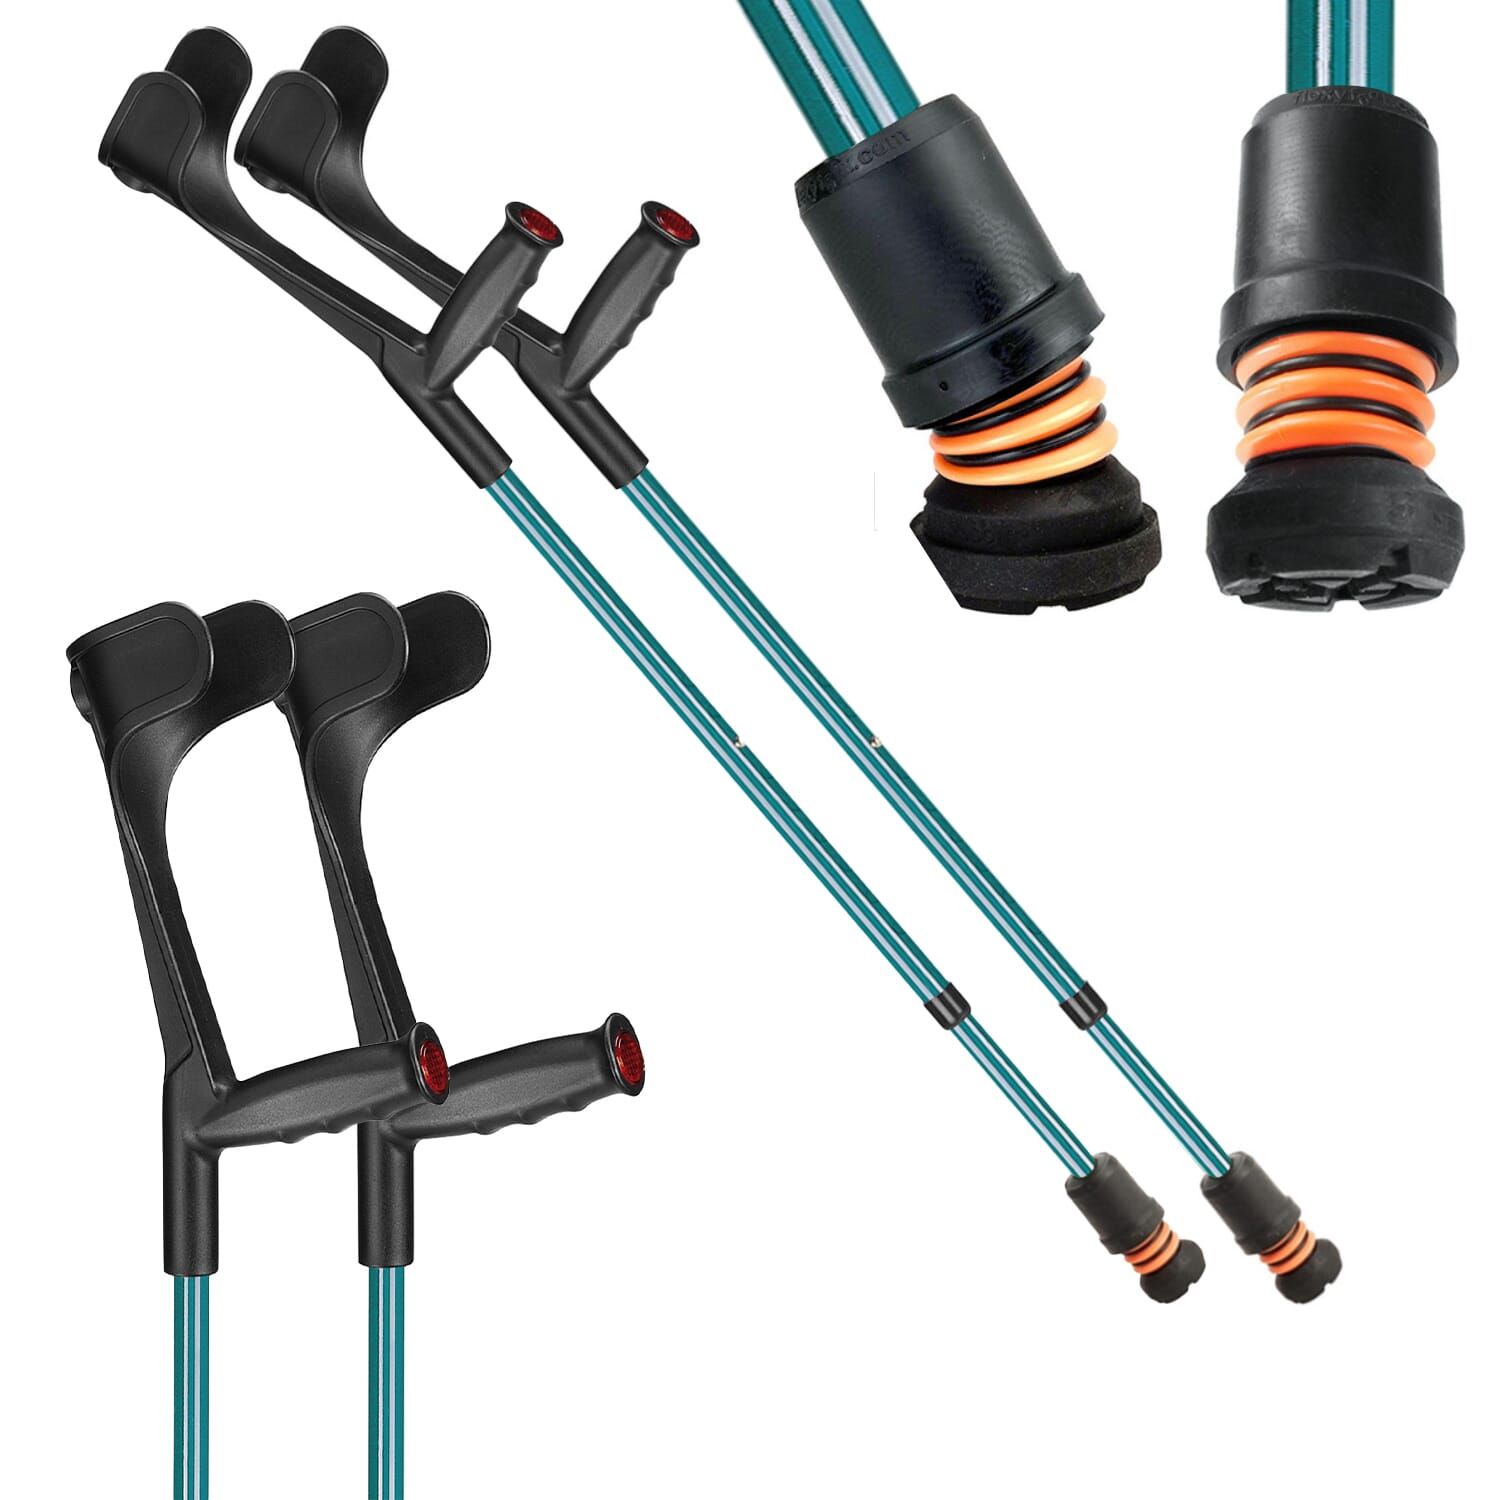 View Flexyfoot Open Cuff Soft Grip Crutches Turquoise Pair information